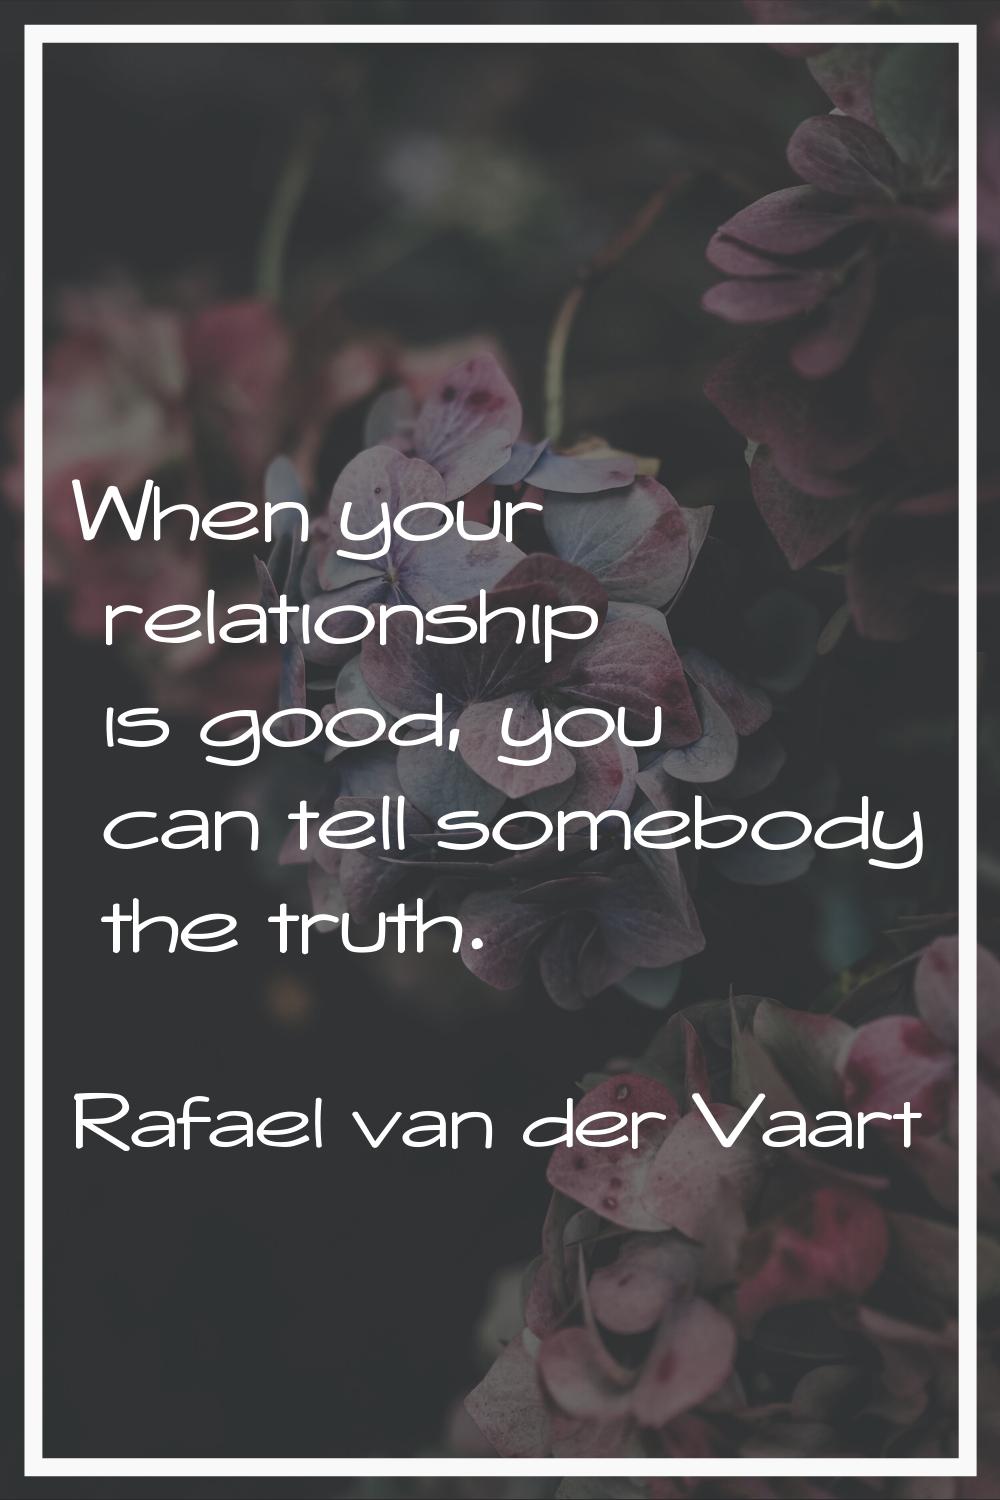 When your relationship is good, you can tell somebody the truth.